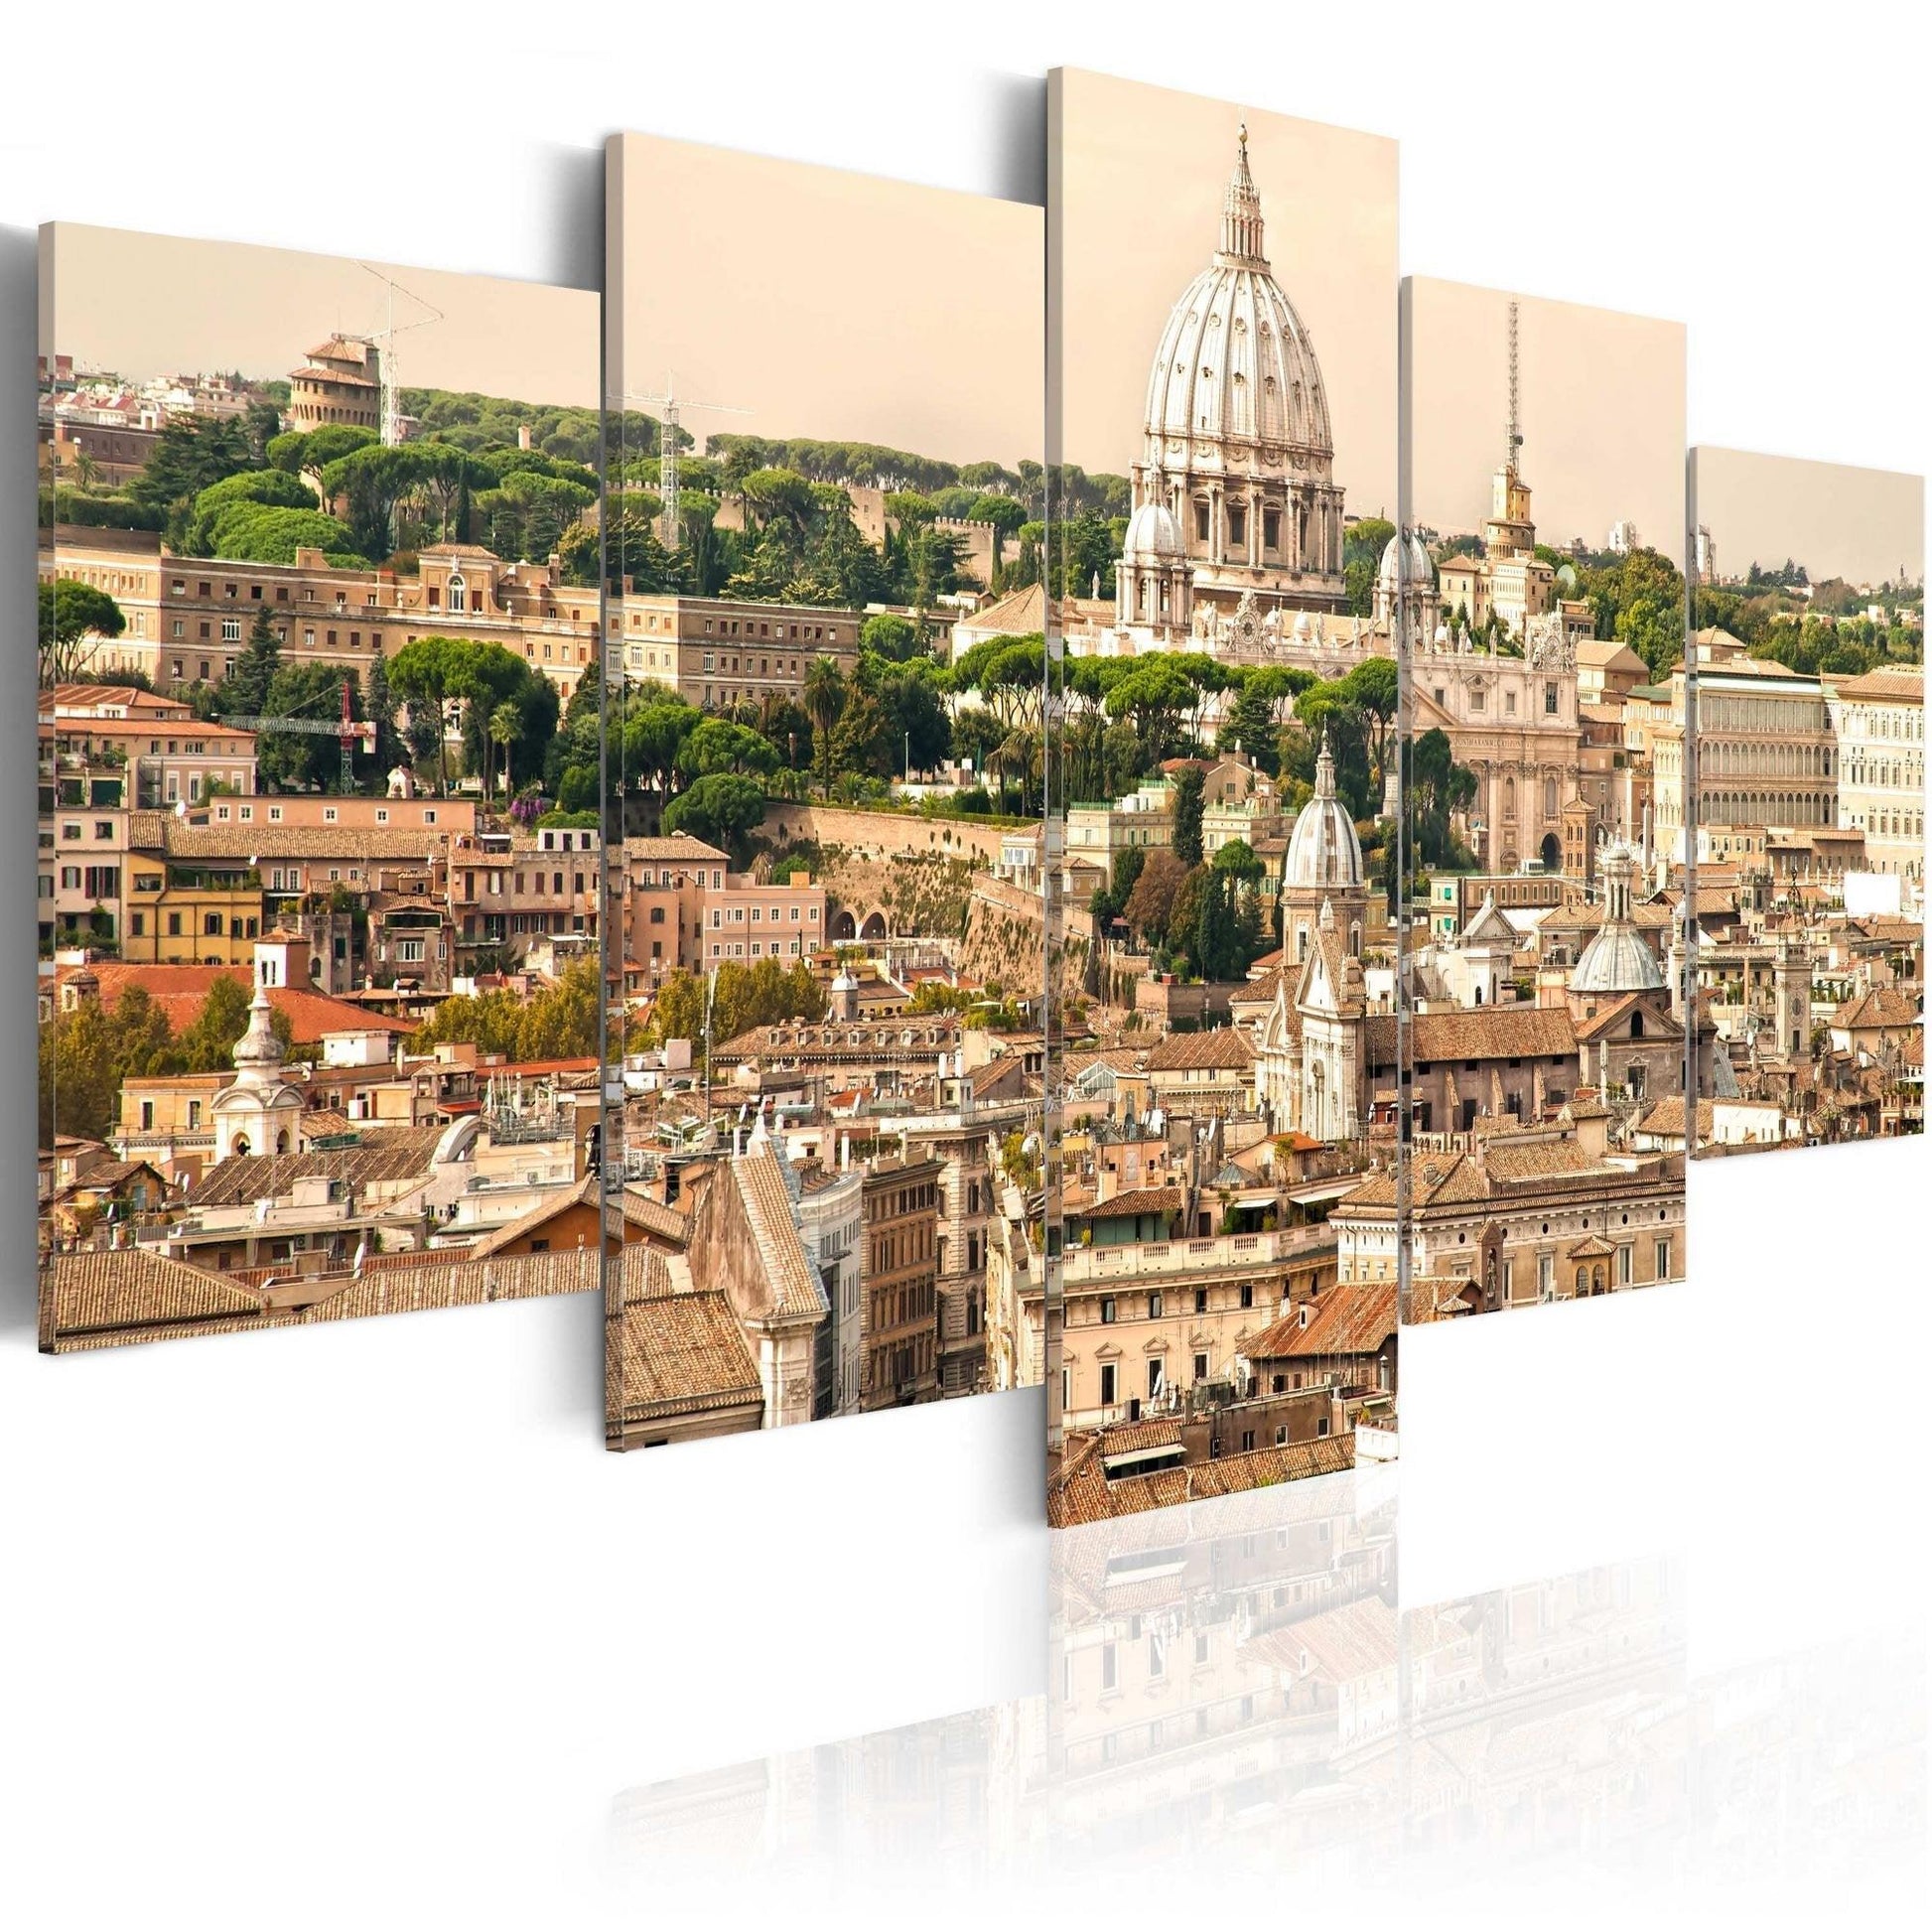 Canvas Print - The roofs of the Eternal City - www.trendingbestsellers.com